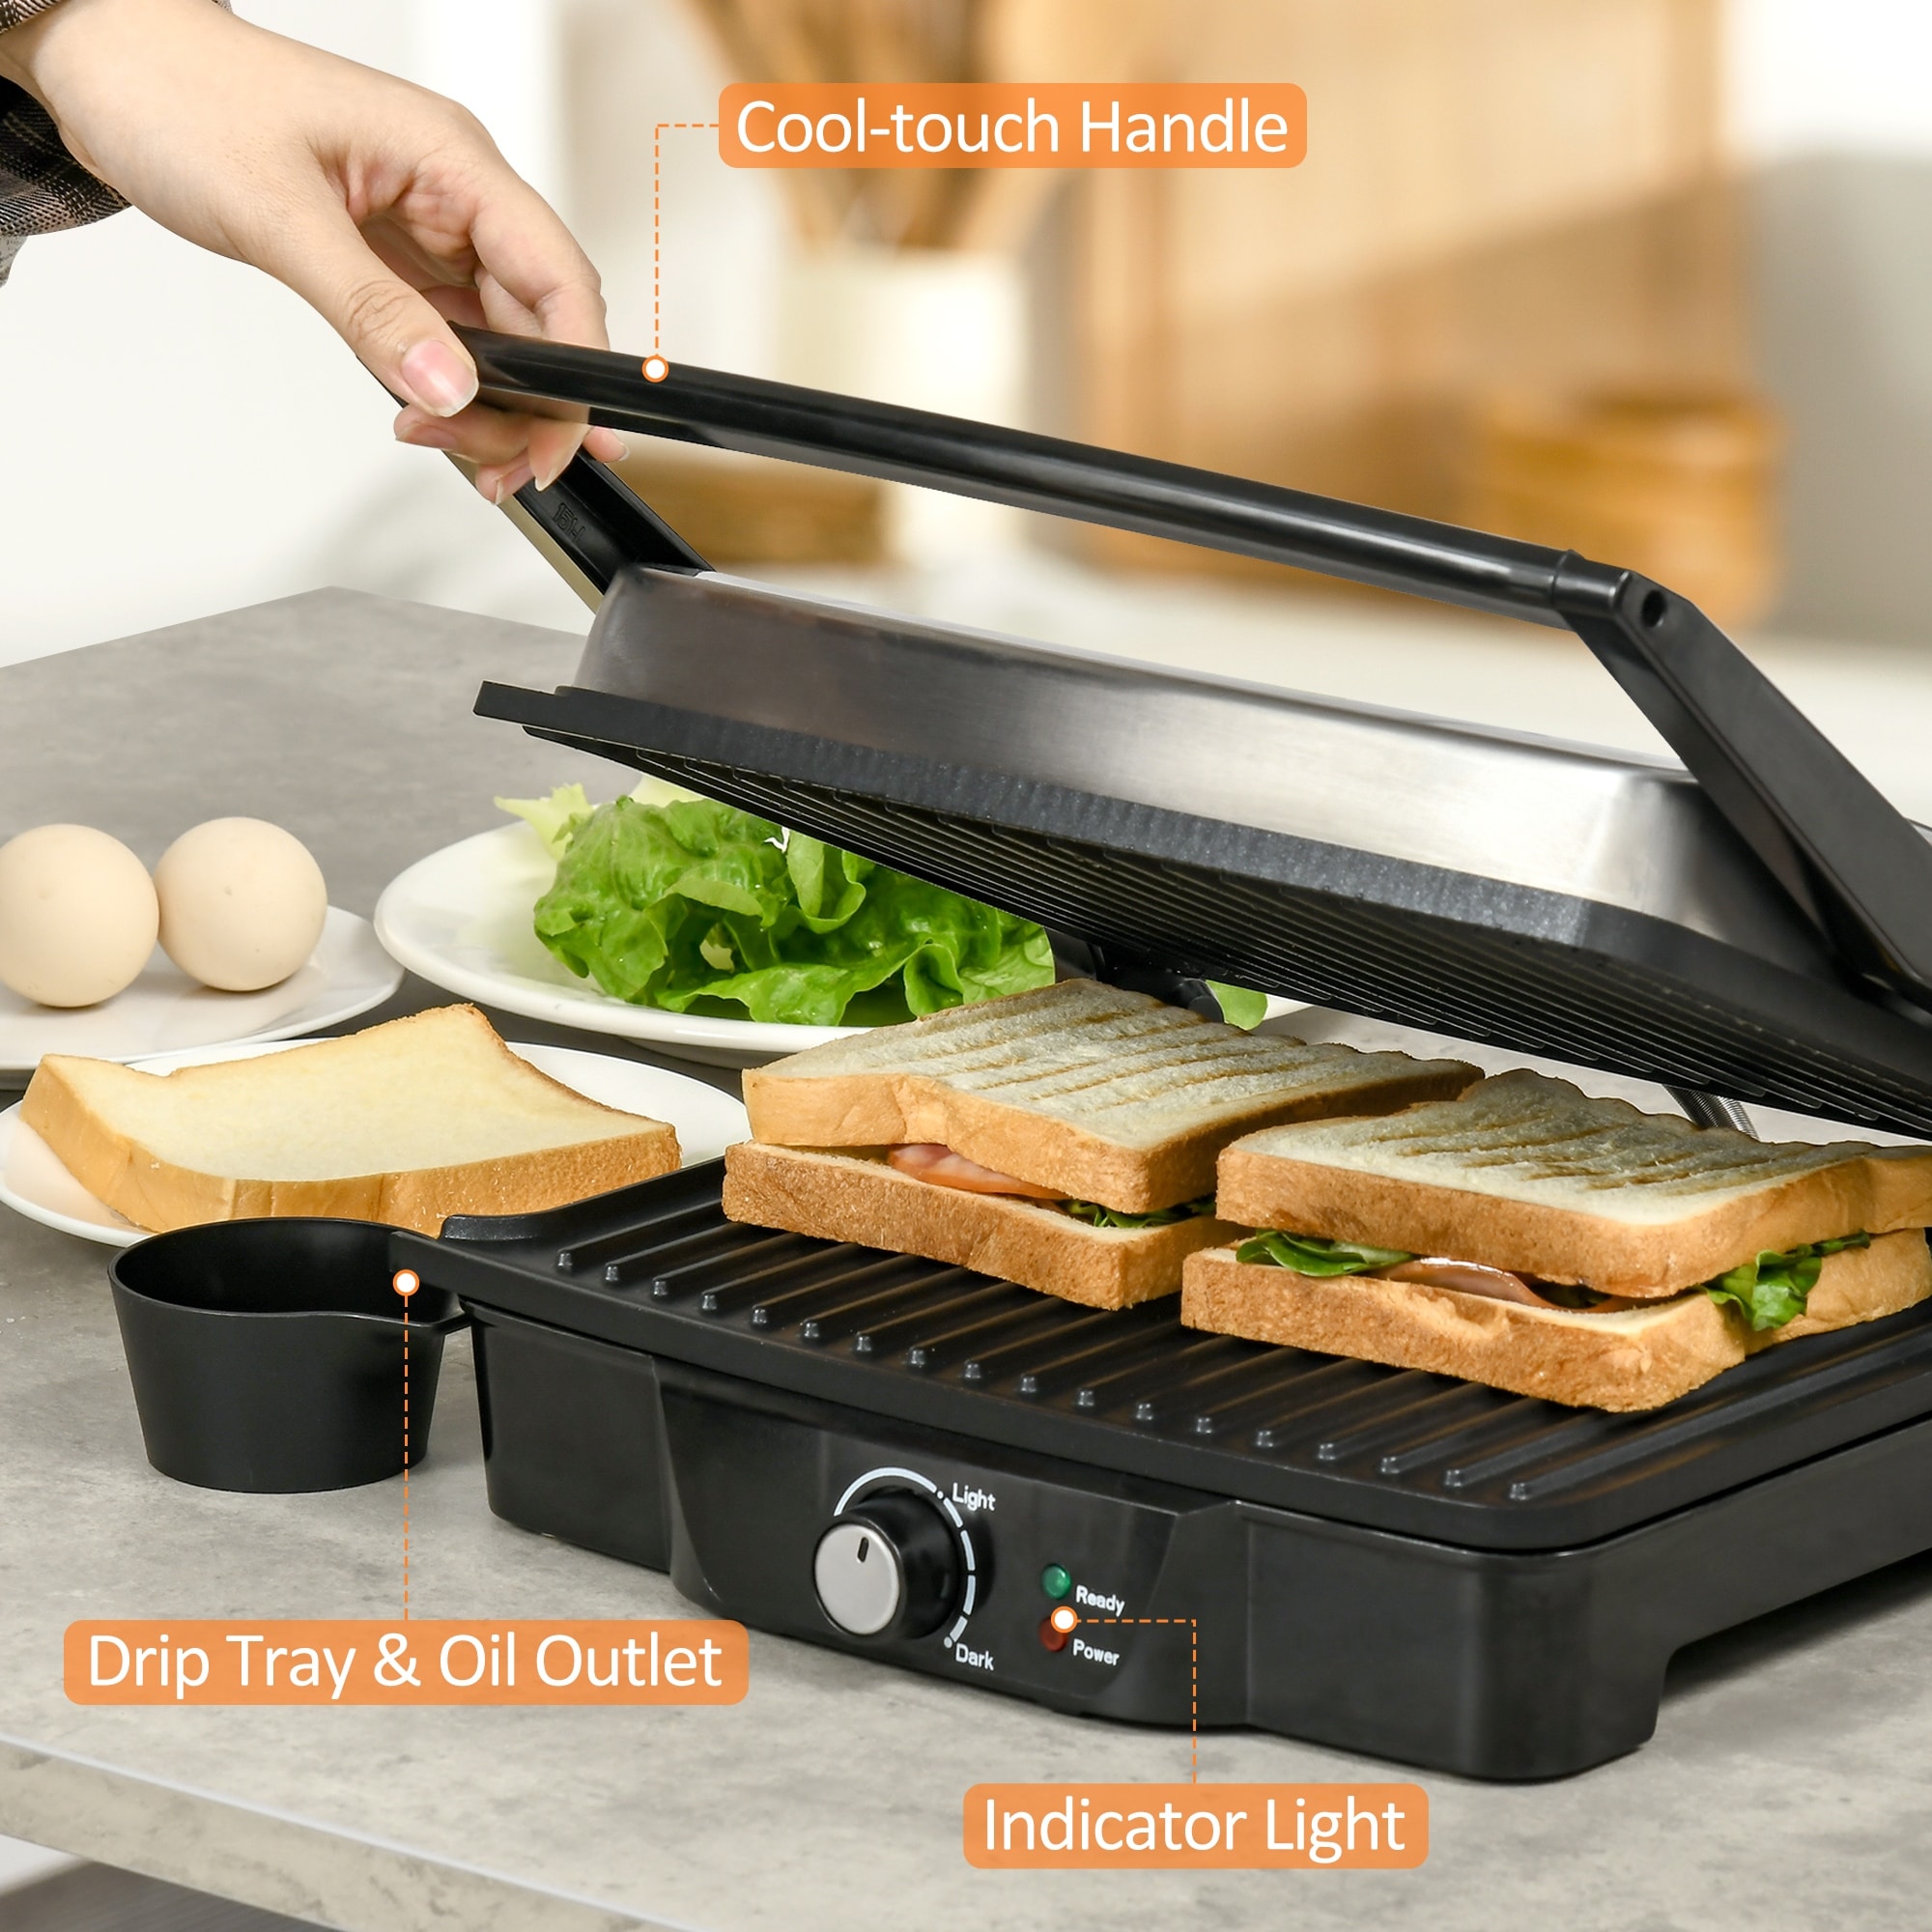 https://ak1.ostkcdn.com/images/products/is/images/direct/0608bb1b9eeea9f9eb048f3058b6fb4fb5575371/HOMCOM-4-Slice-Panini-Press-Grill%2C-Stainless-Steel-Sandwich-Maker-with-Non-Stick-Double-Plates%2C-Locking-Lids-and-Drip-Tray.jpg